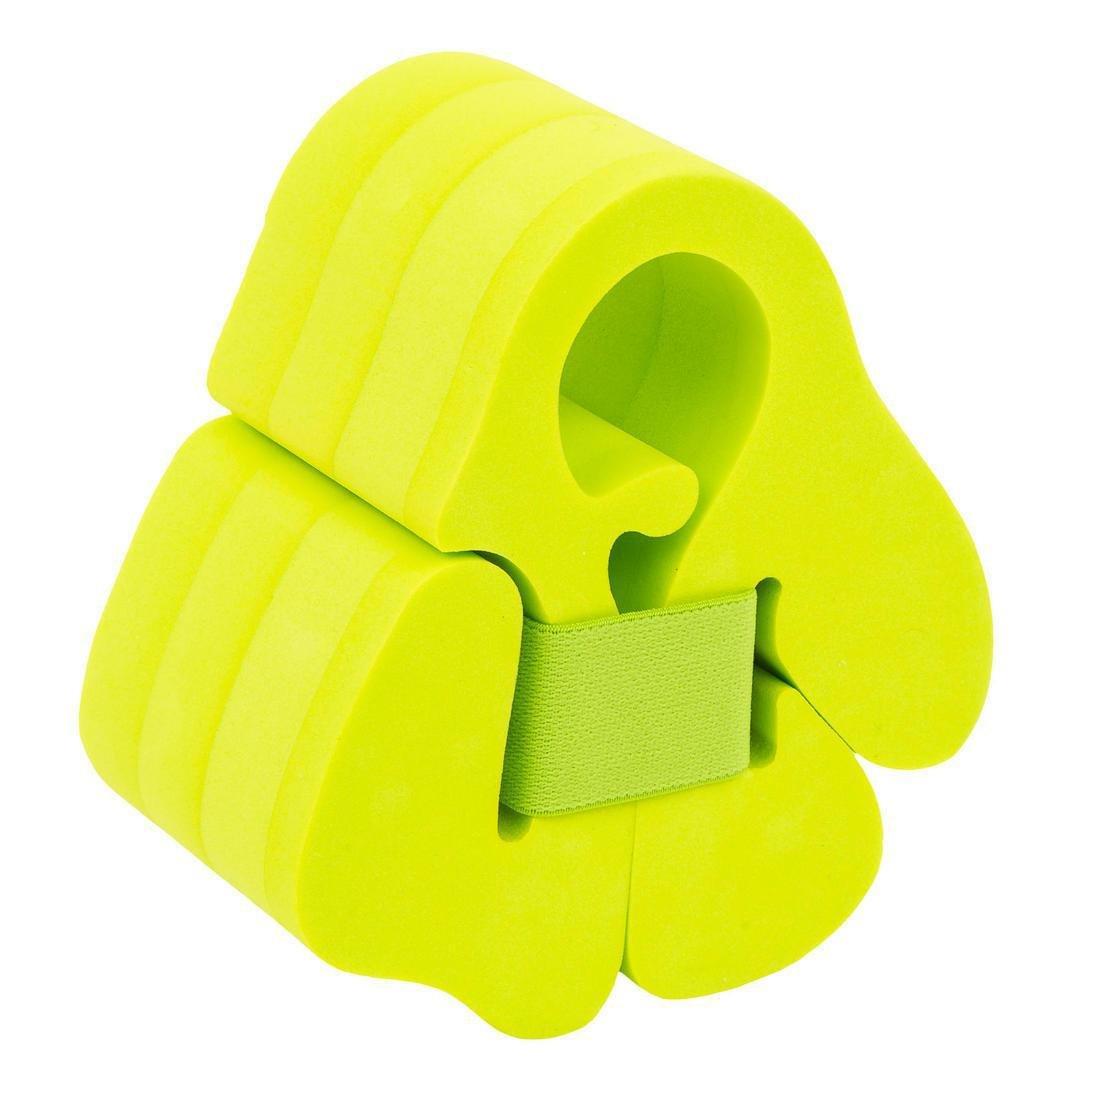 NABAIJI - Swimming Foam Armbands With Elasticated Strap For Kids, Green